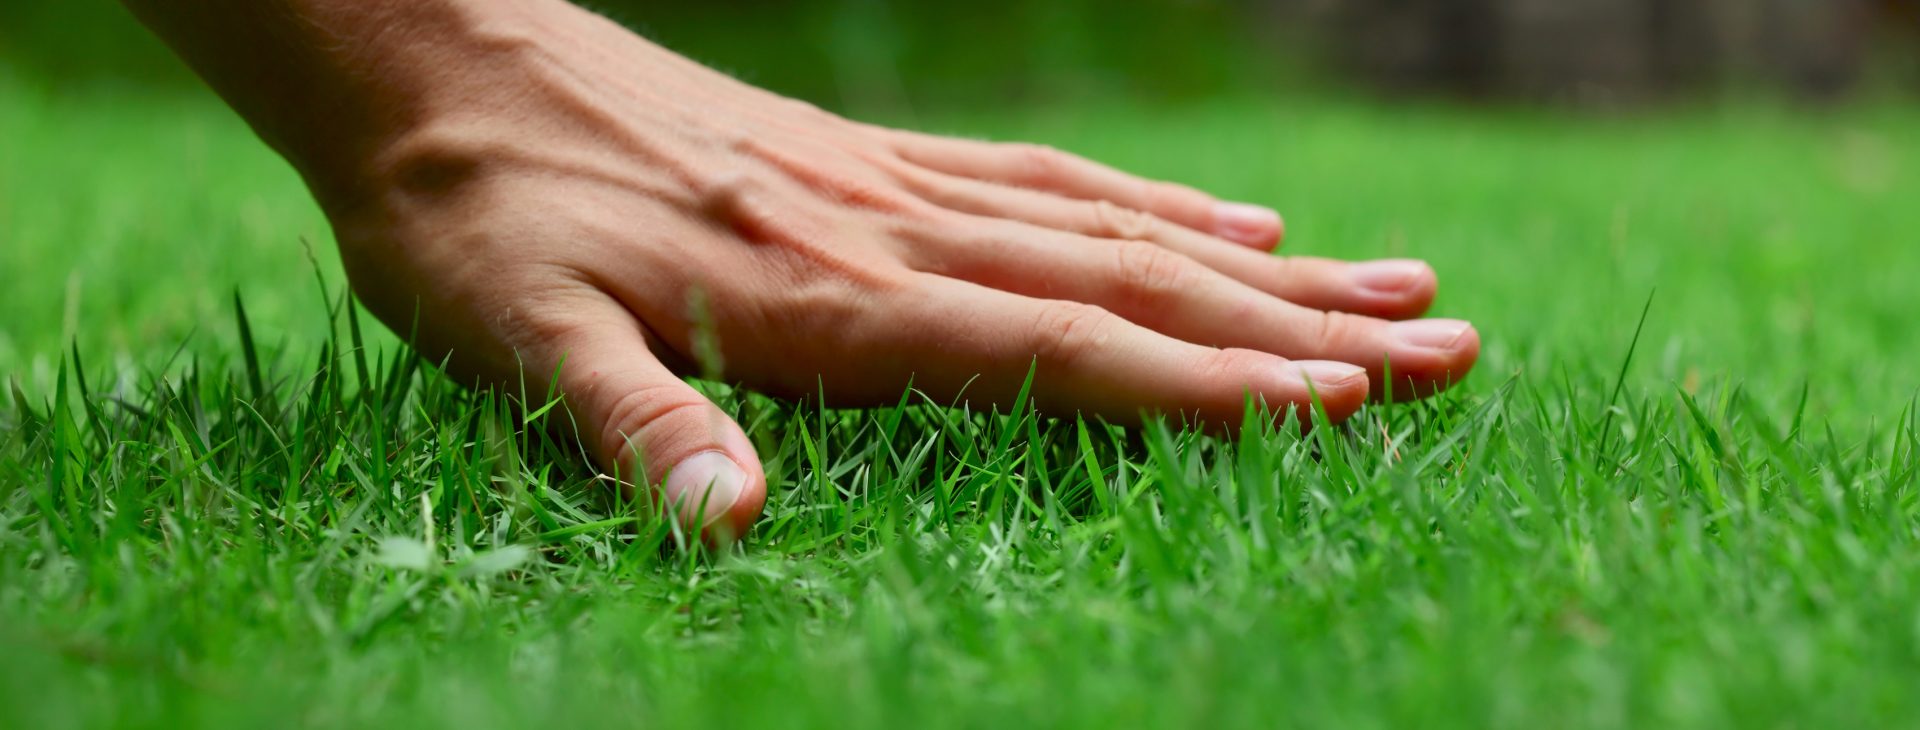 Your lawn and landscape<br />
the way that it should be